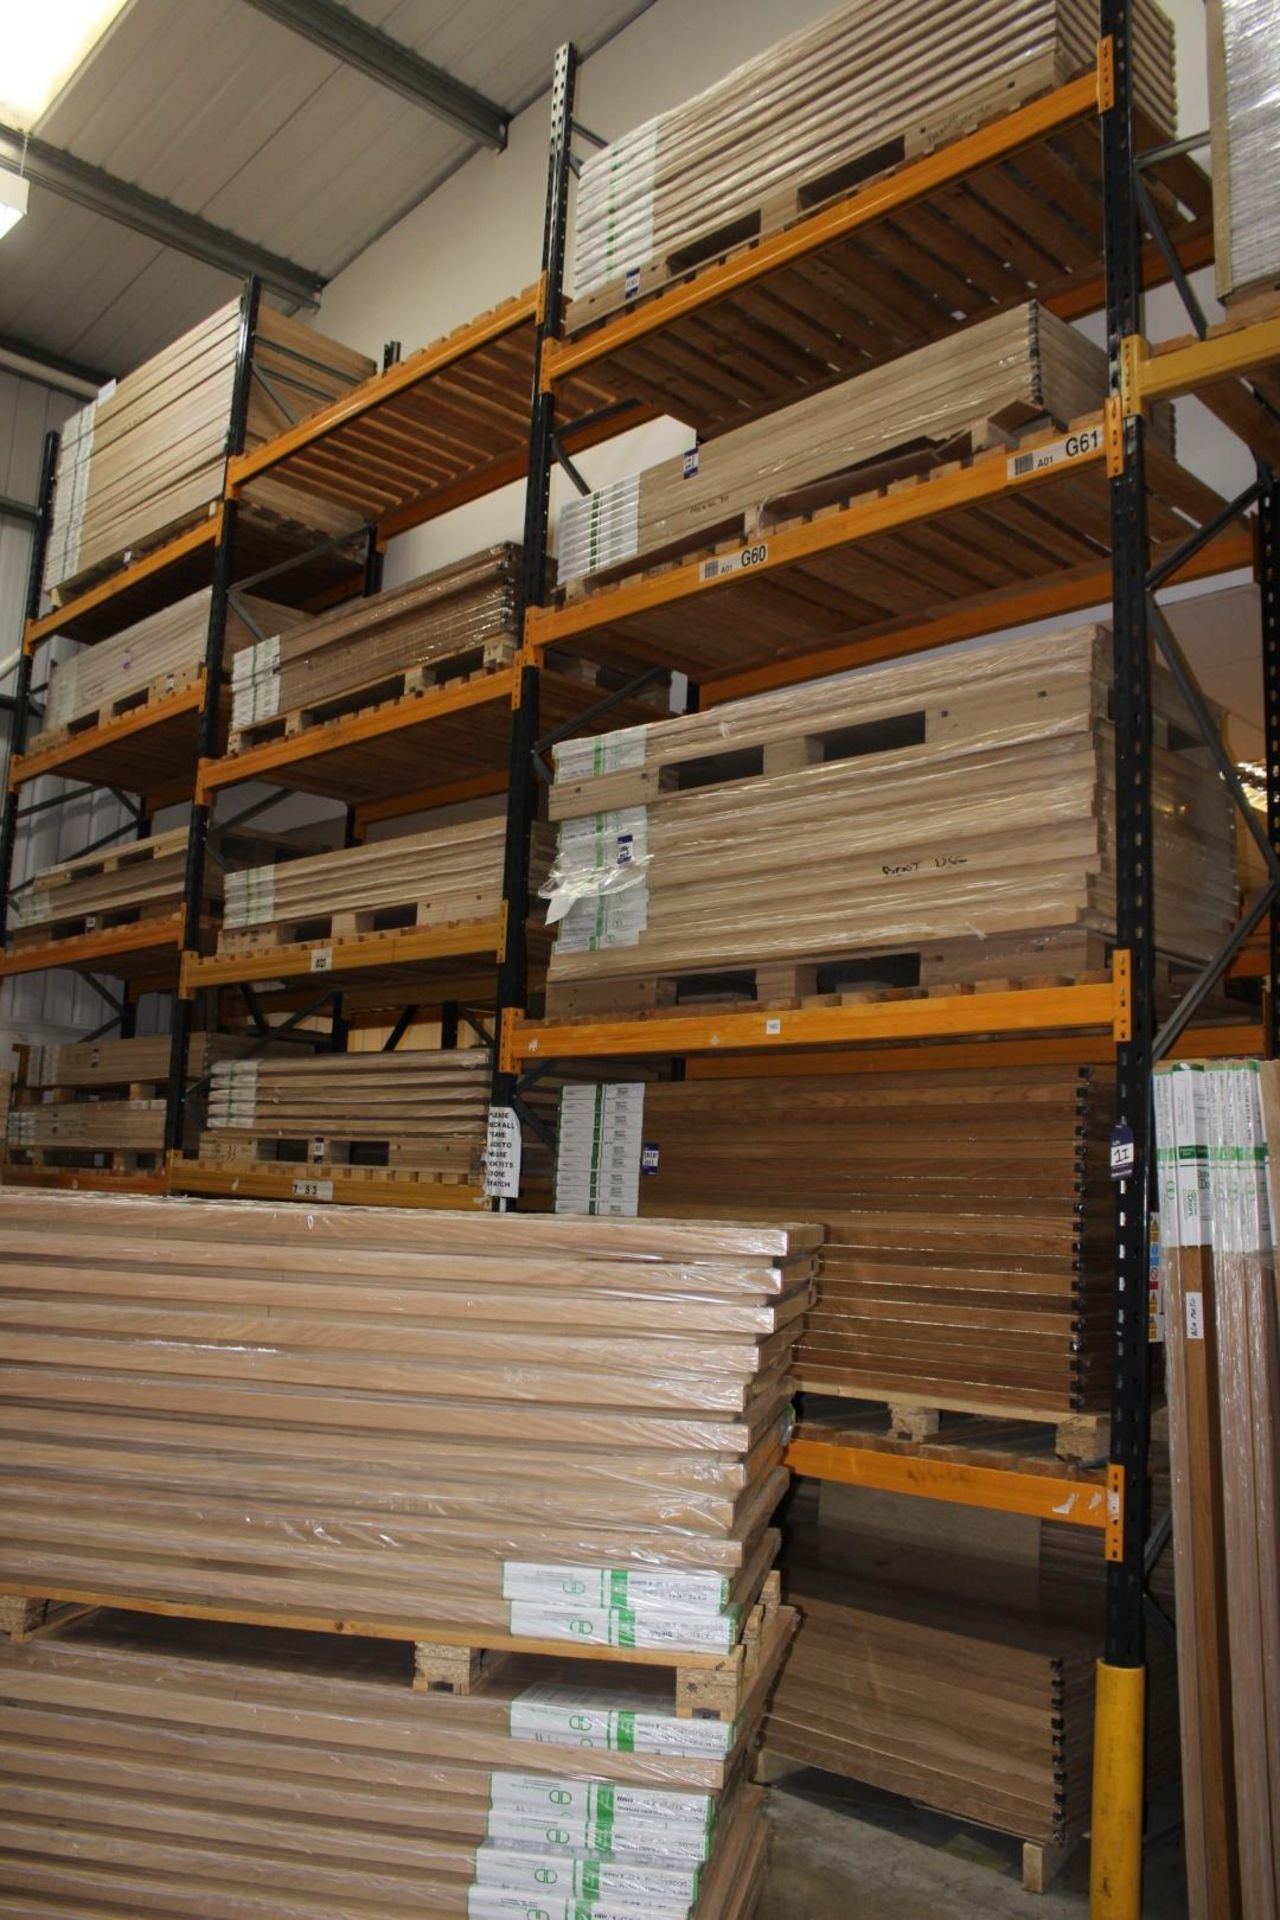 6 x Bays of Link 51E pallet racking, comprising 7 x 6m uprights, 40 x 2.4m cross beams, wooden